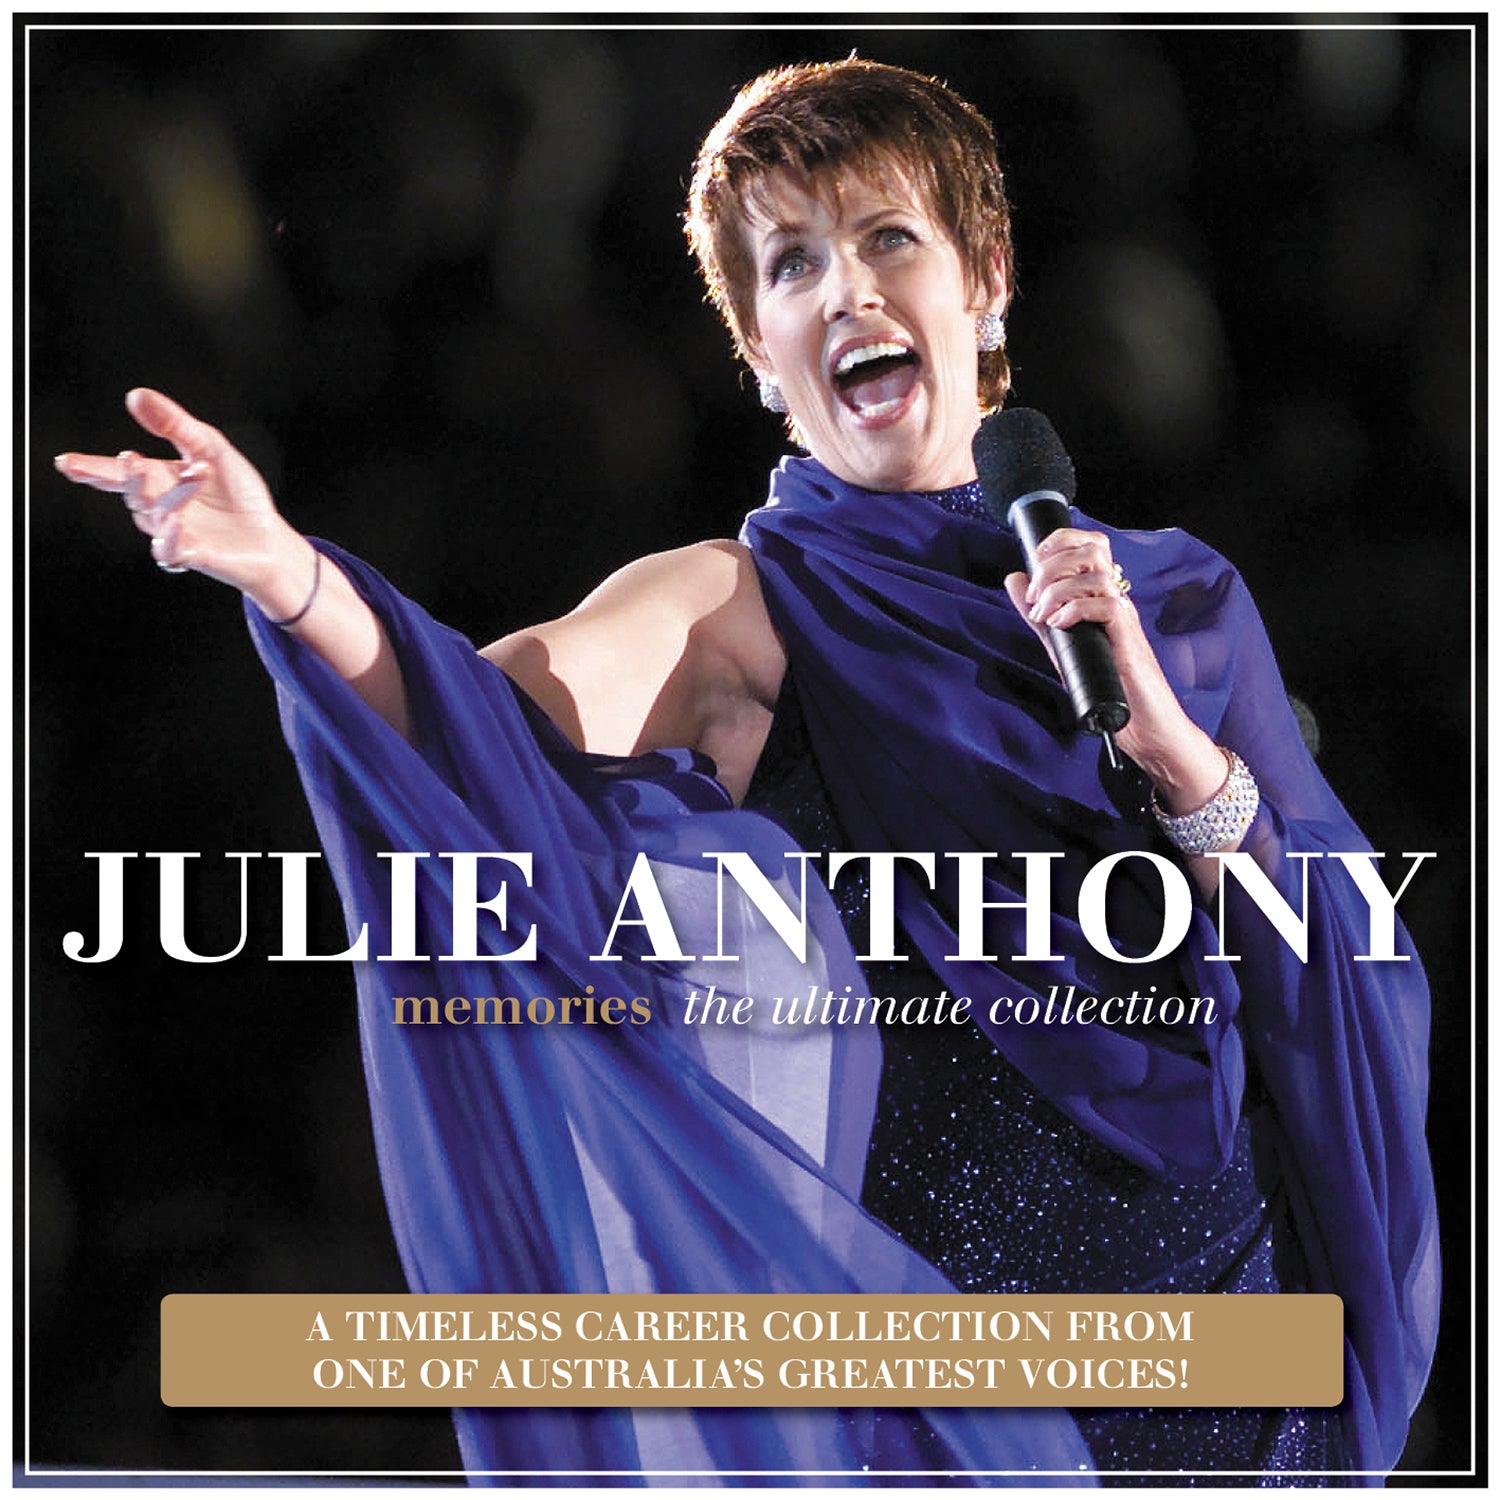 JULIE ANTHONY - MEMORIES THE ULTIMATE COLLECTION